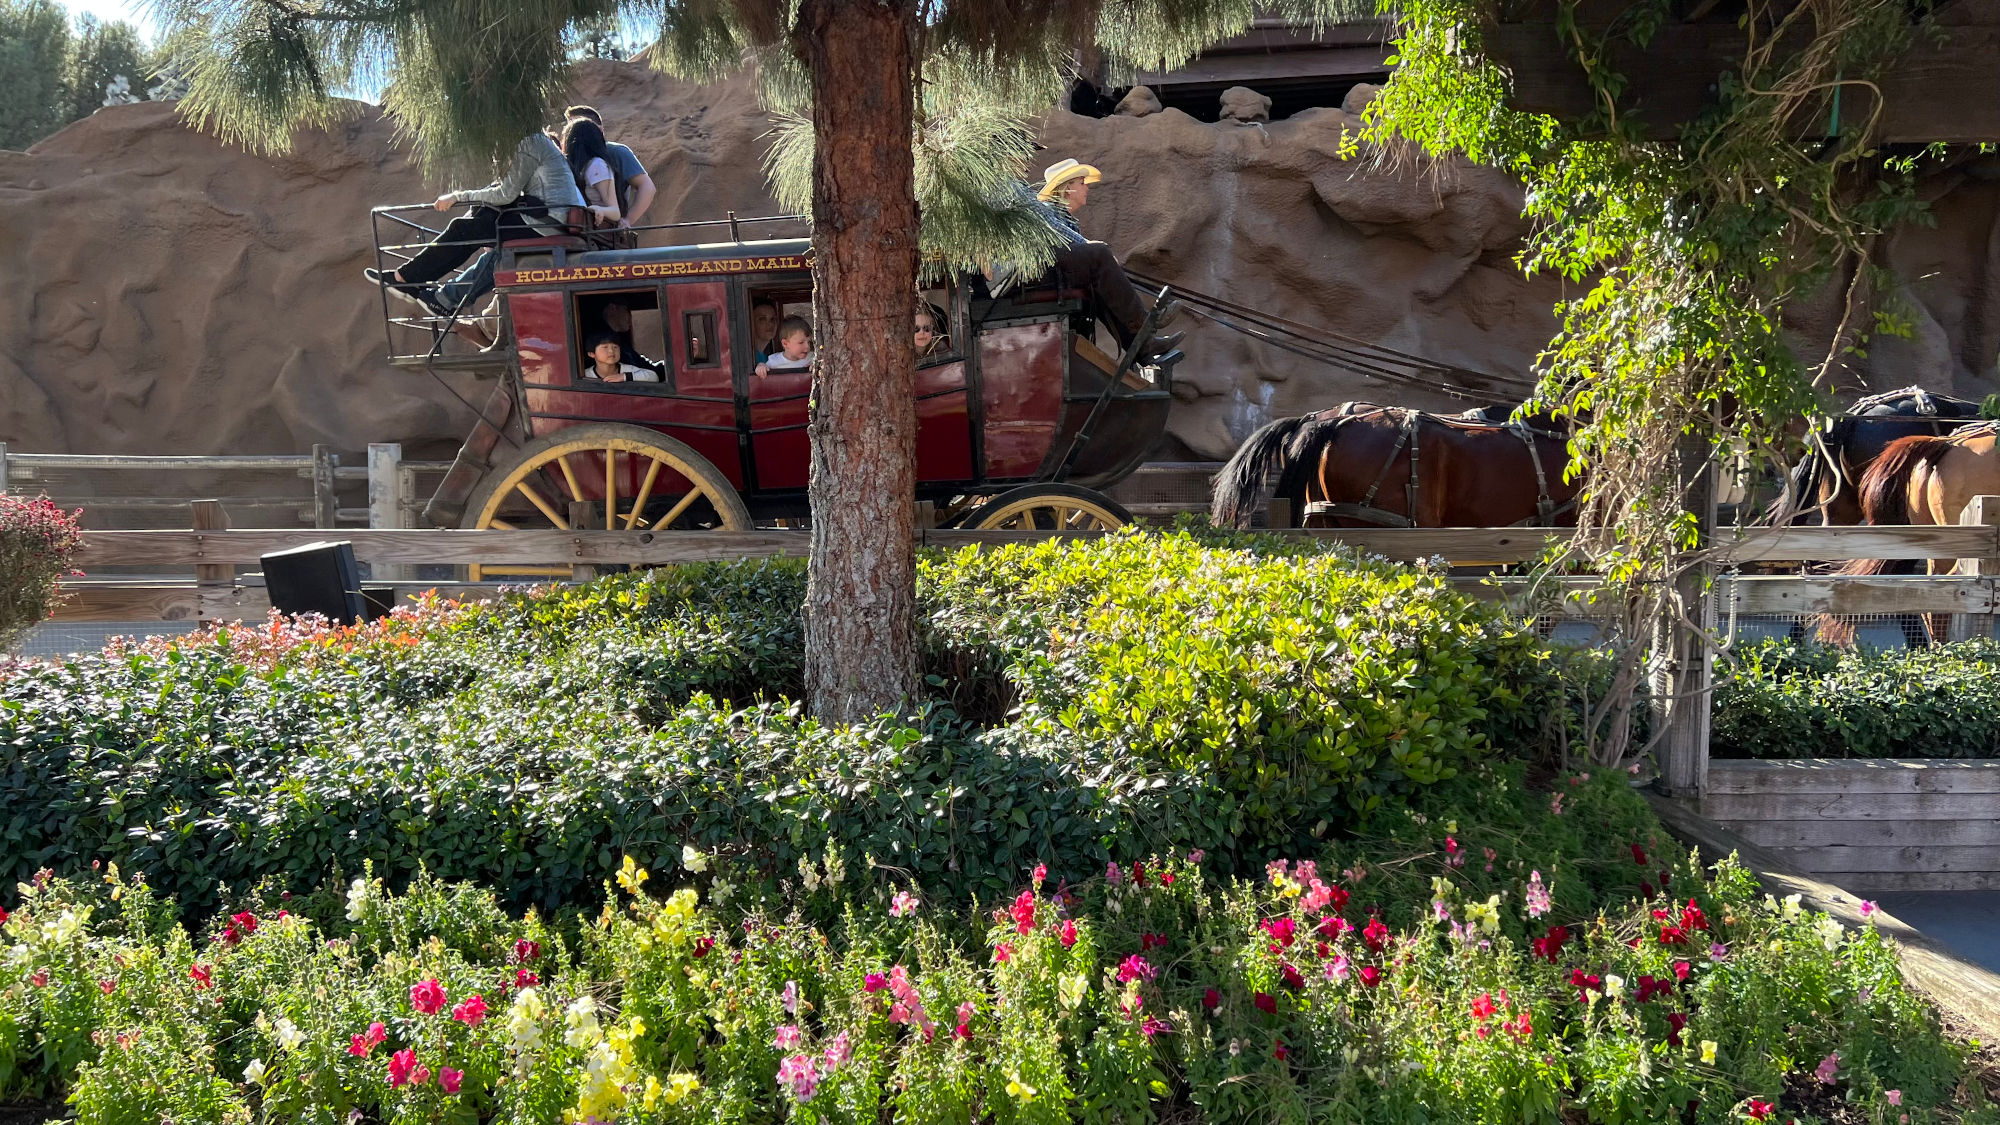 Butterfield Stagecoach riding by Santa Barbara Mission model